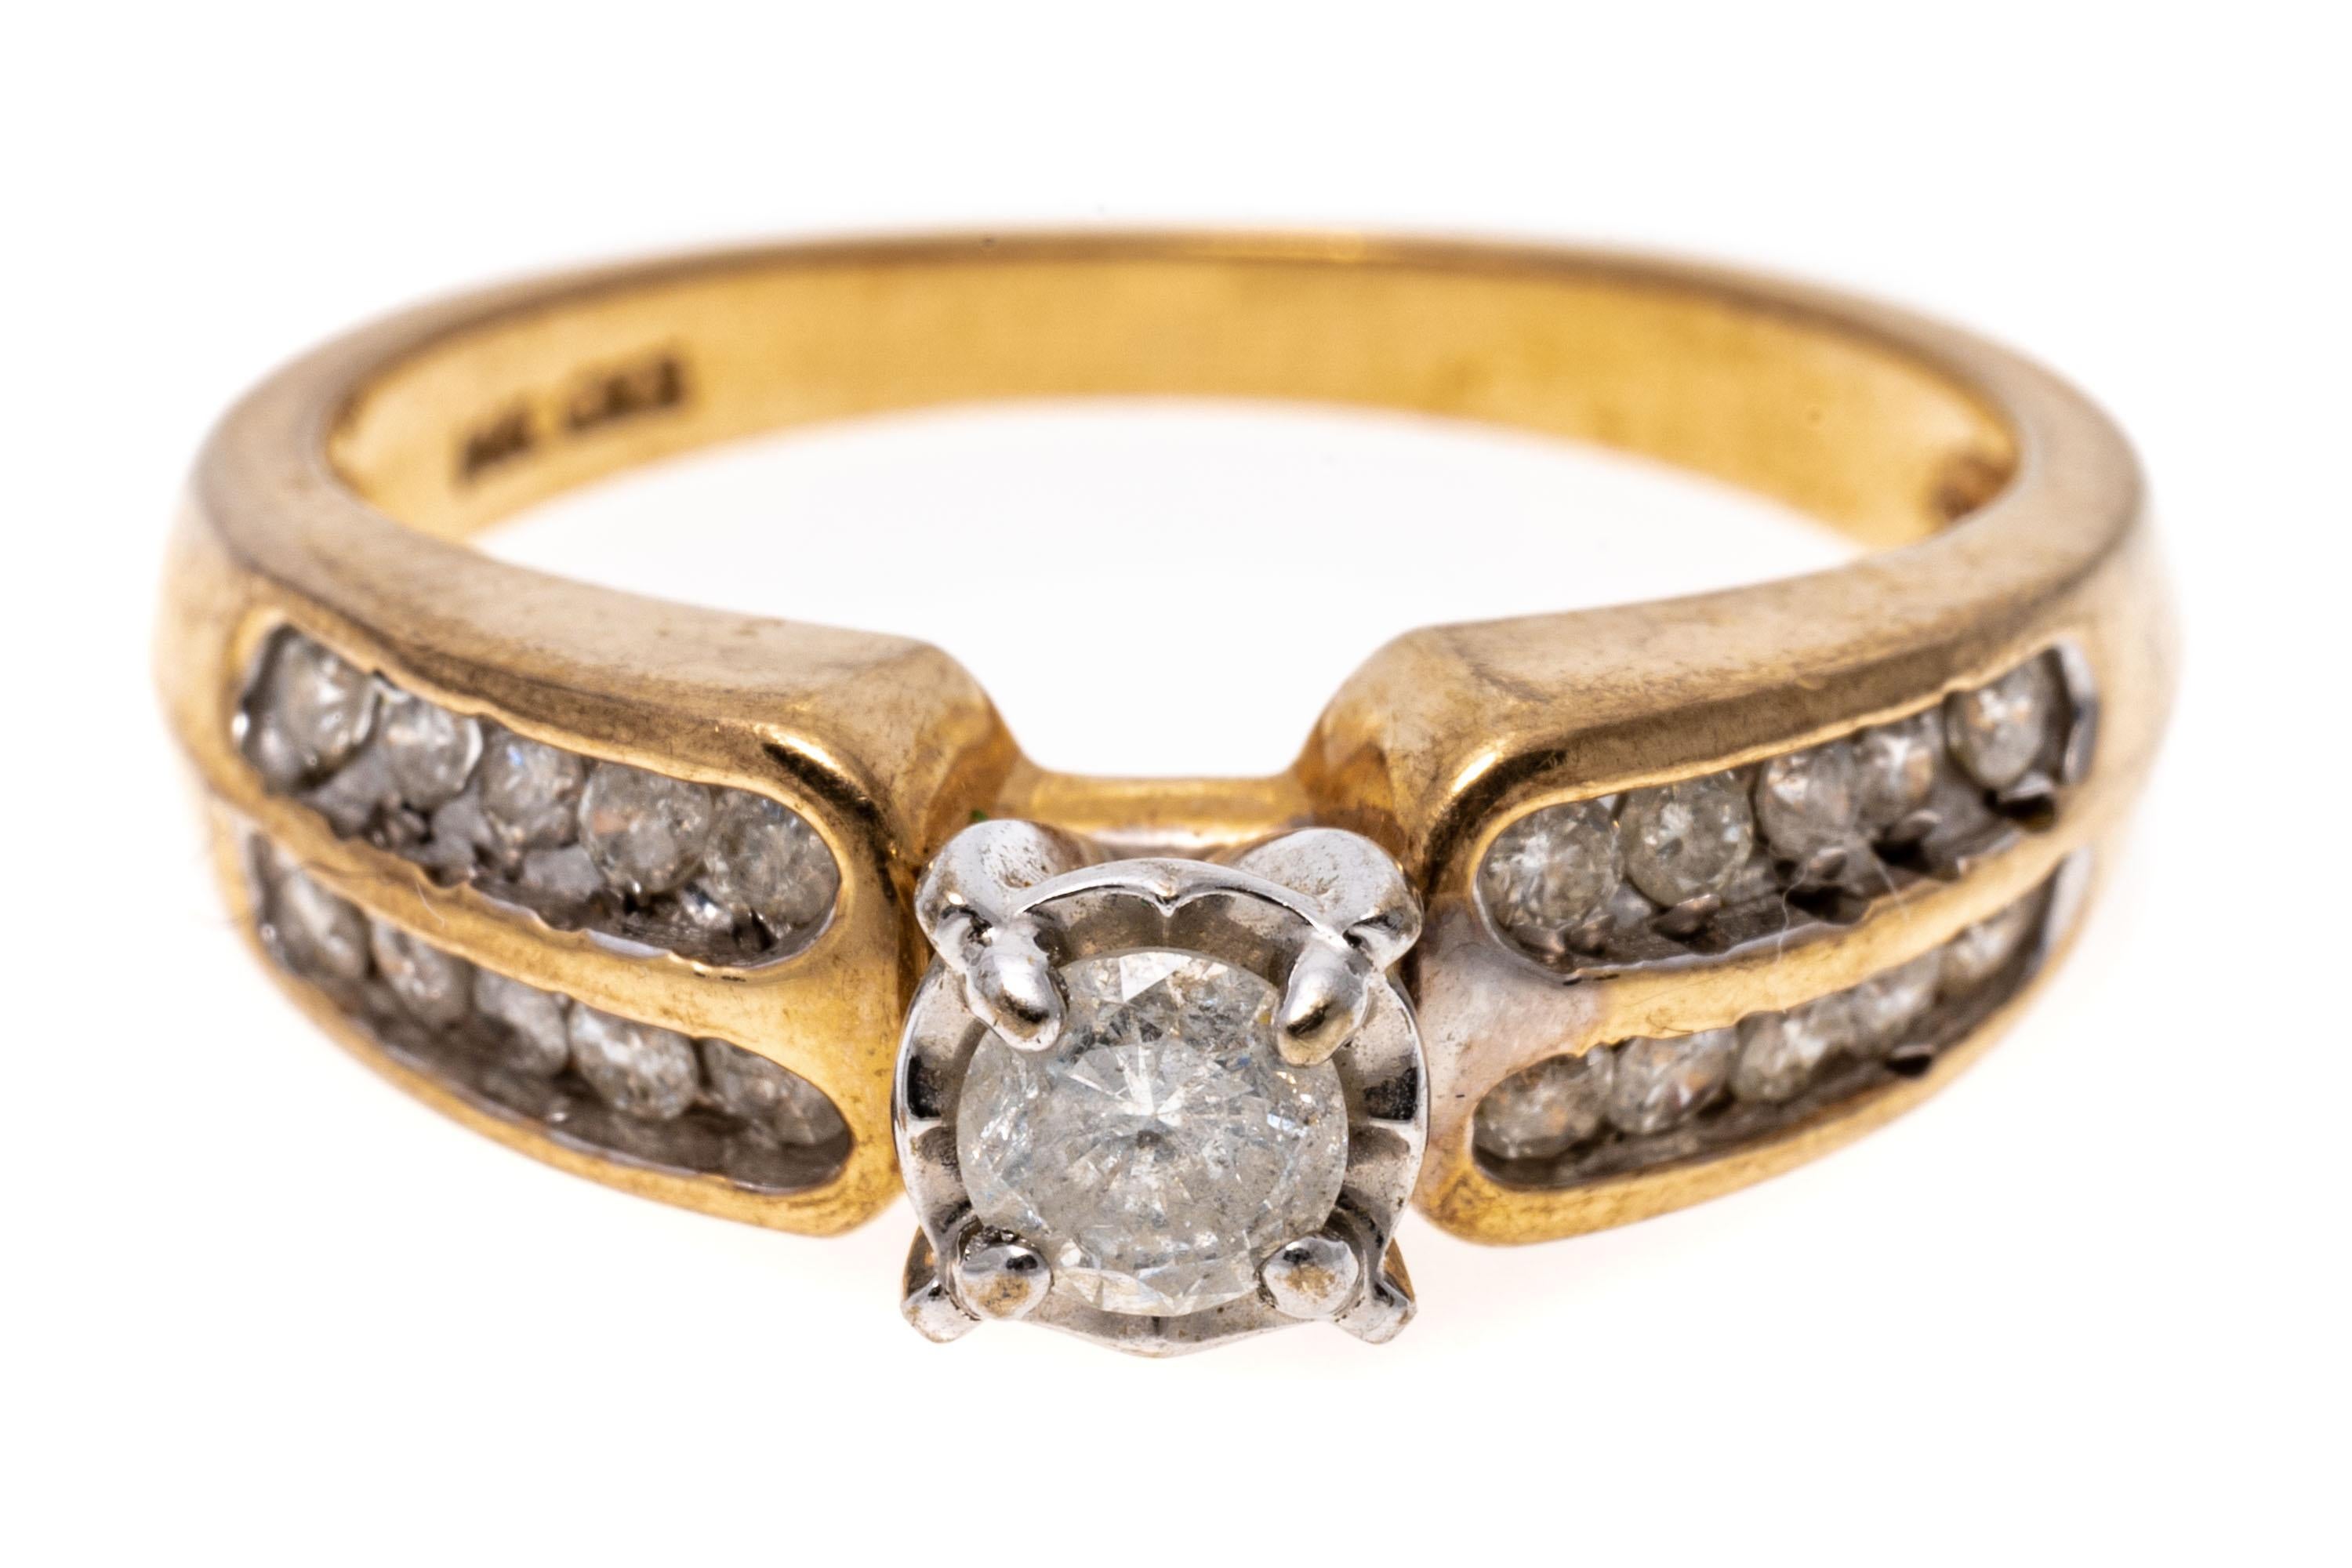 14k yellow gold ring. This classic engagement ring has a round brilliant cut center, approximately 0.17 CTS and set into an illusion style top, and is flanked by two rows of channel set, round faceted diamonds, approximately 0.20 TCW. The stones are